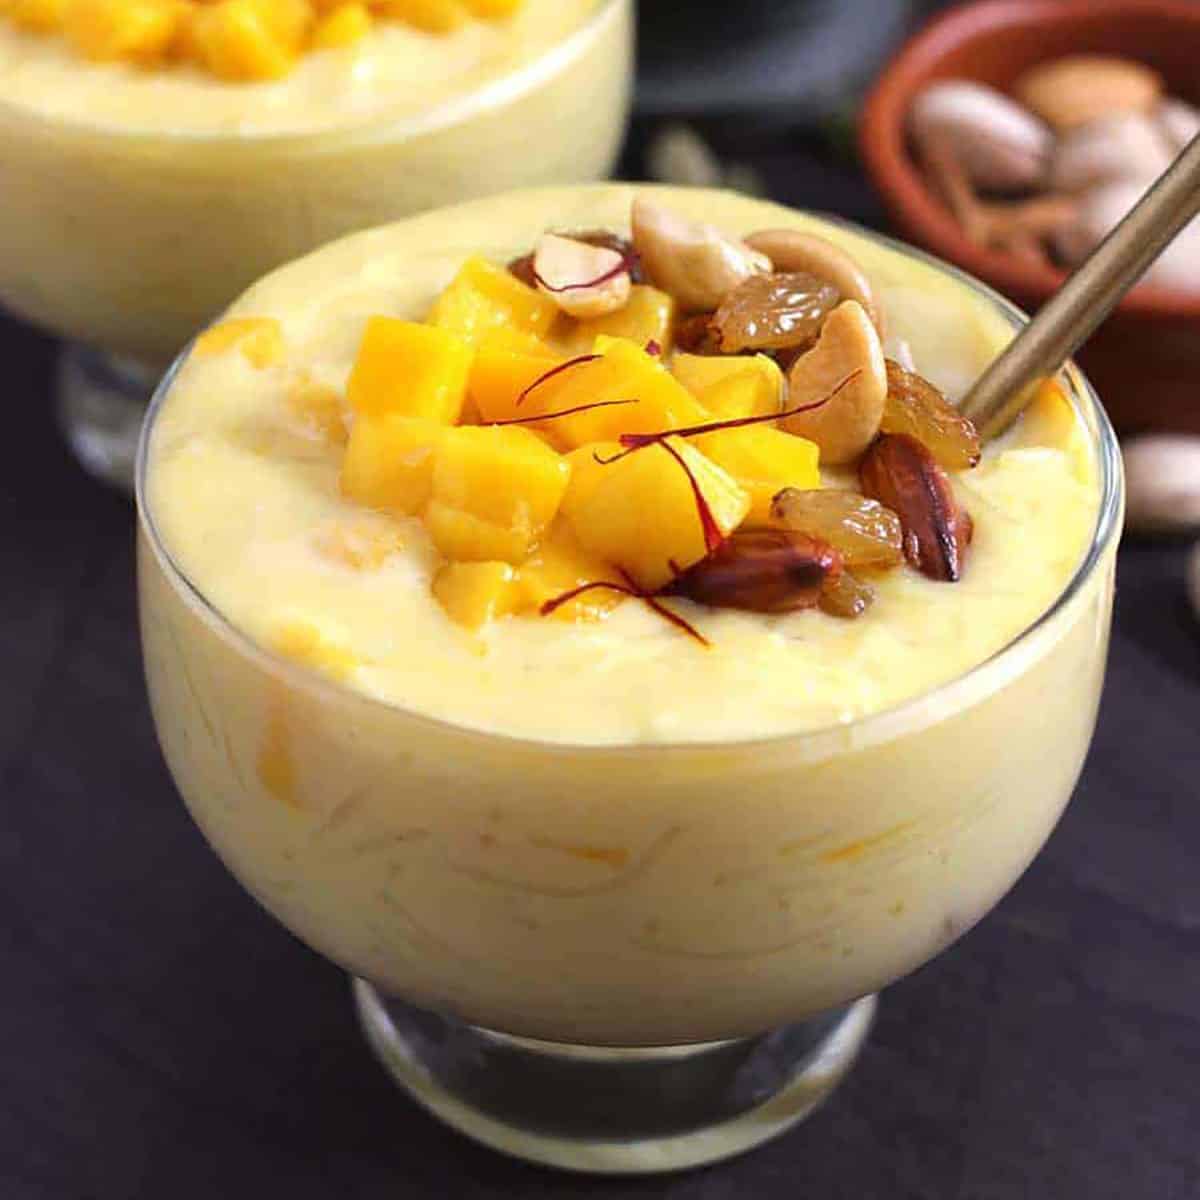 Mango vermicelli kheer served in bowl, garnished with mango, saffron, toasted raisins and nuts.